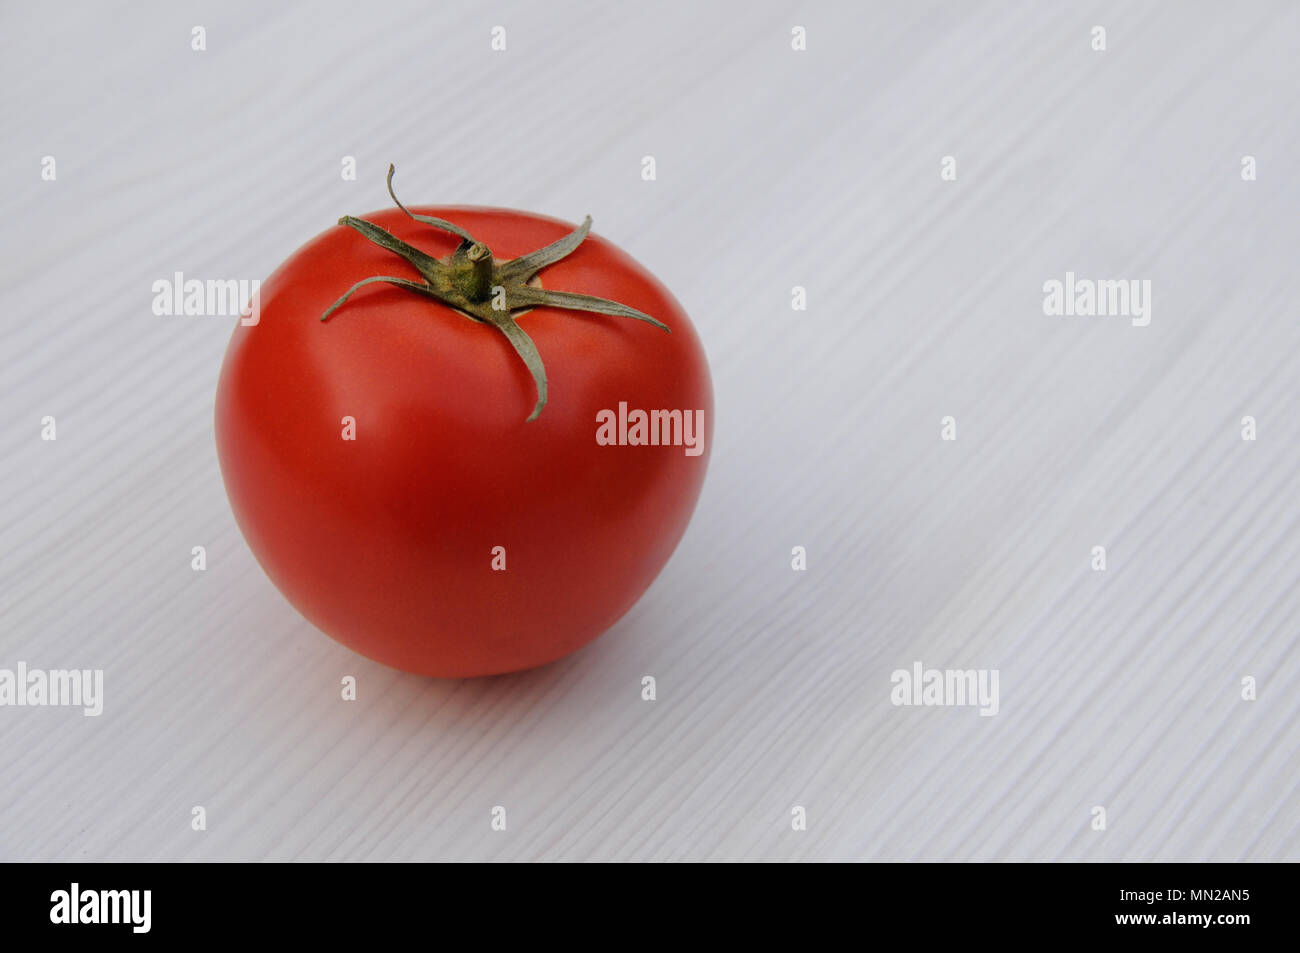 Red tomato on wooden table with copy space Stock Photo